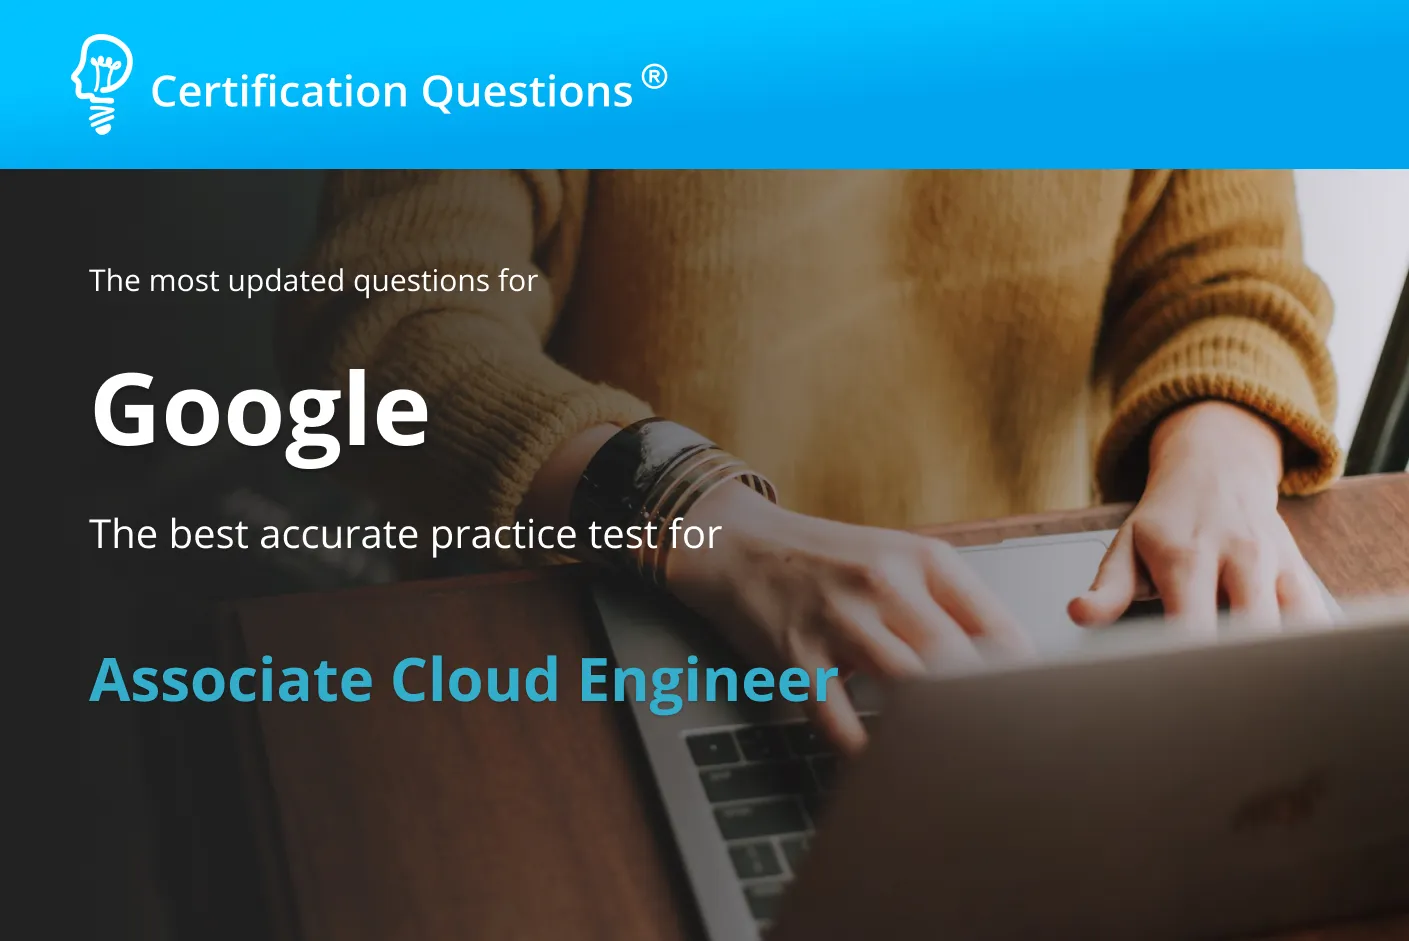 Here is the image for the google cloud platform associate cloud engineer practice test